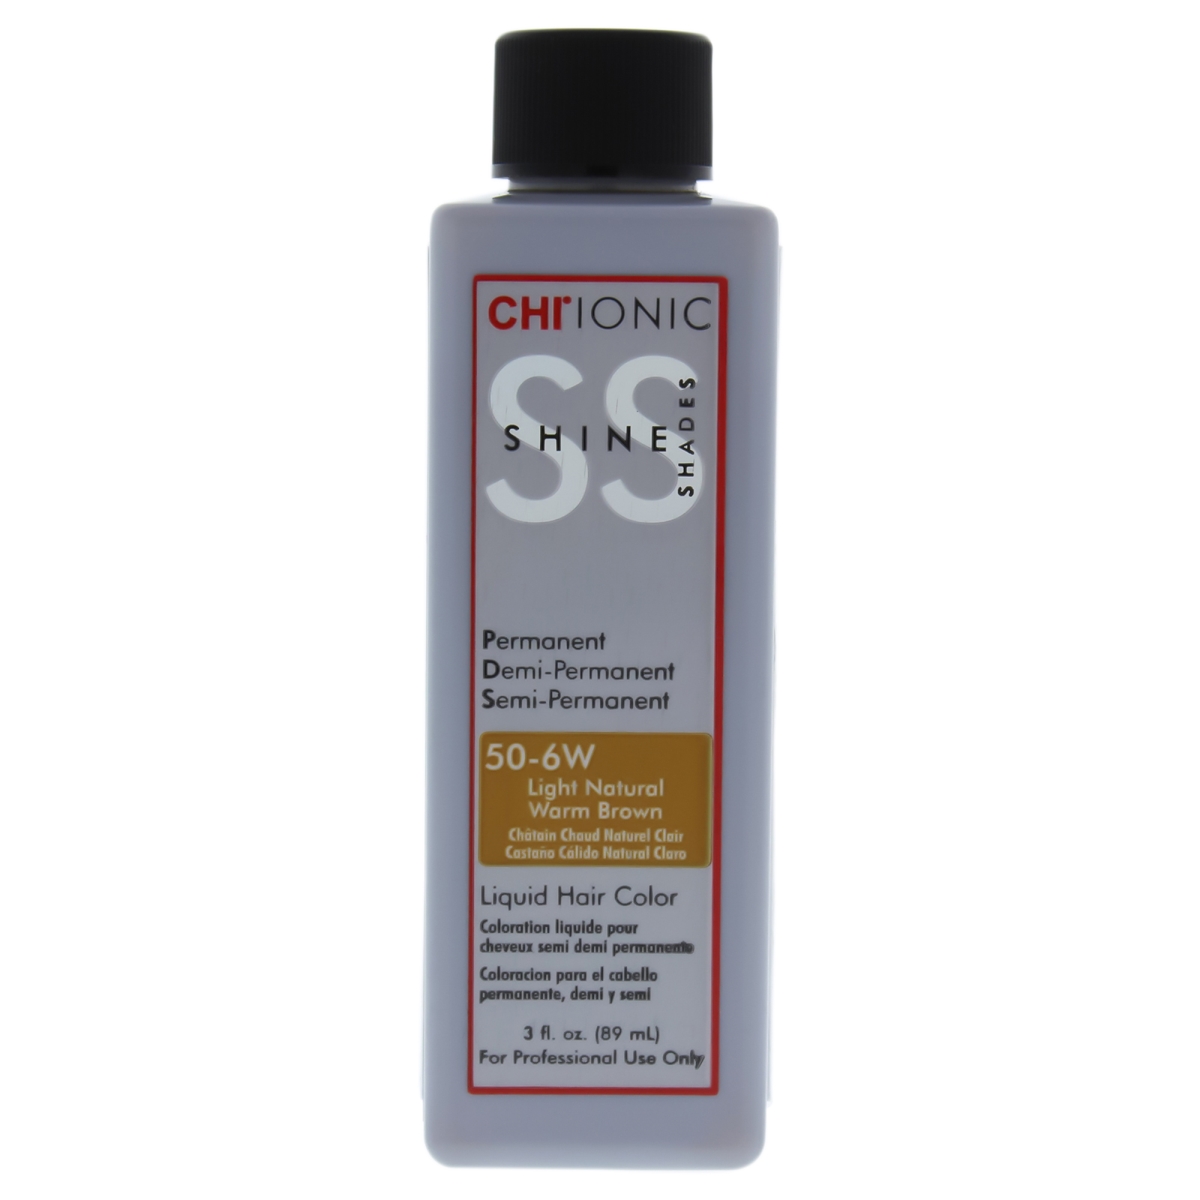 I0084021 Ionic Shine Shades Liquid Hair Color For Unisex - 50-6w Light Natural Warm Brown - 3 Oz